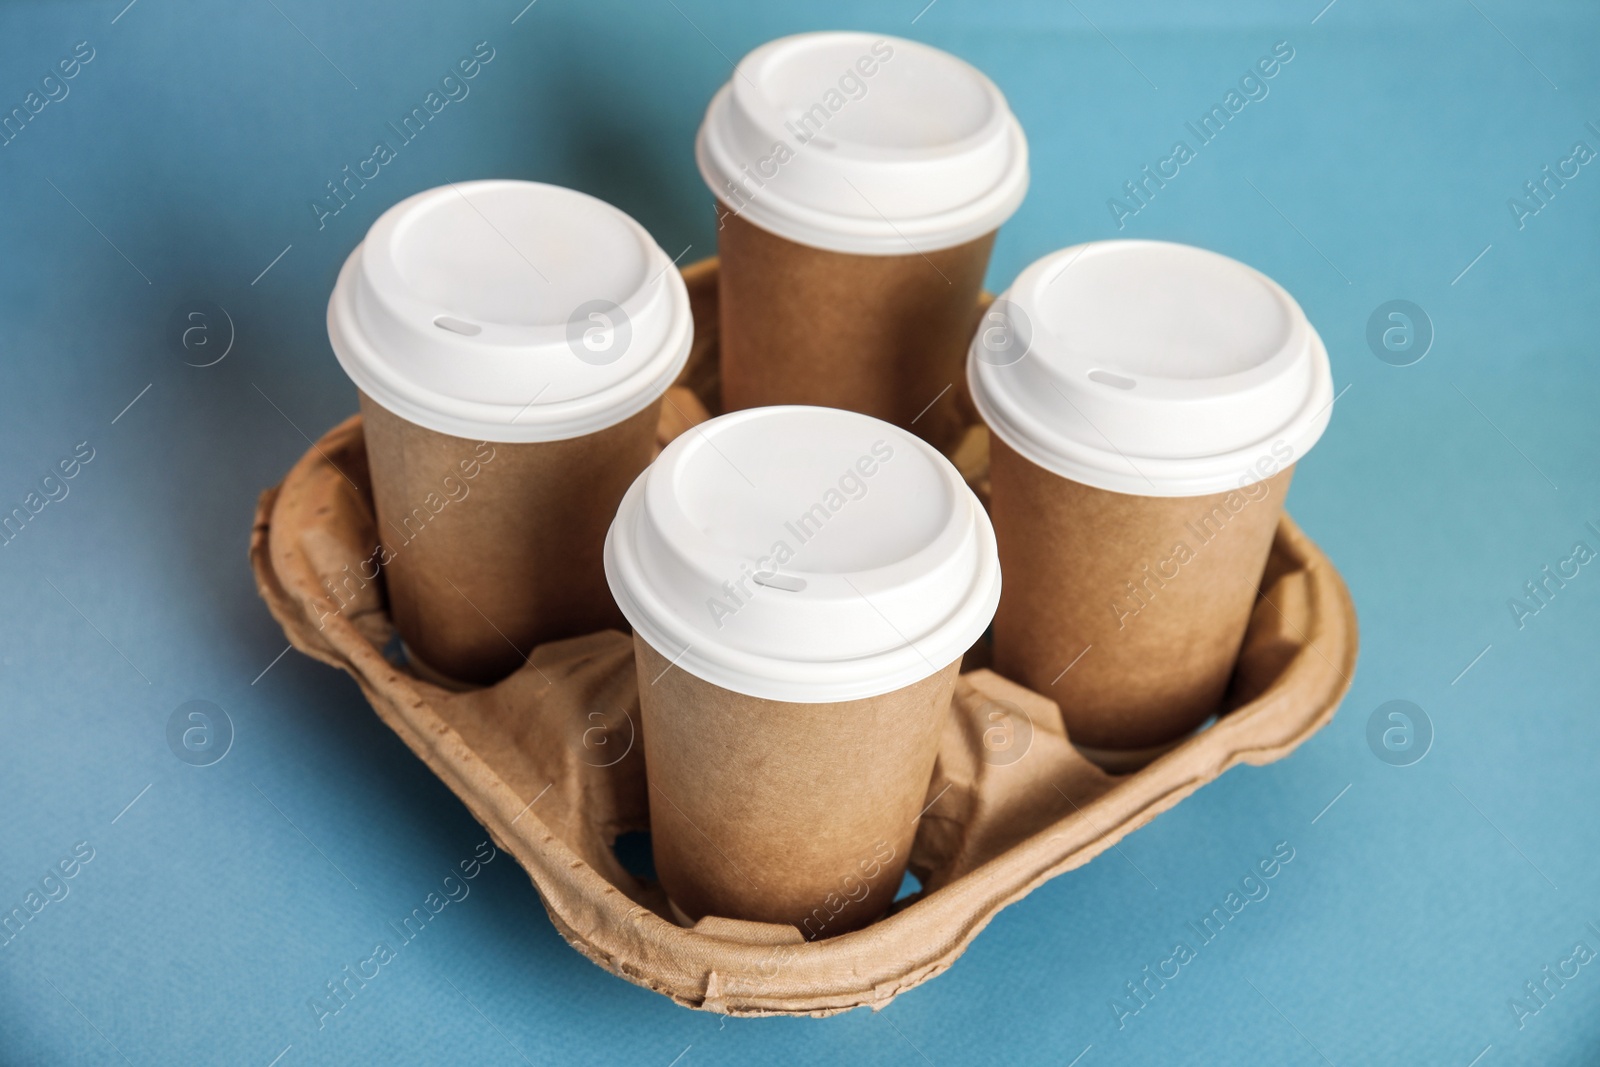 Photo of Takeaway paper coffee cups with plastic lids in cardboard holder on blue background